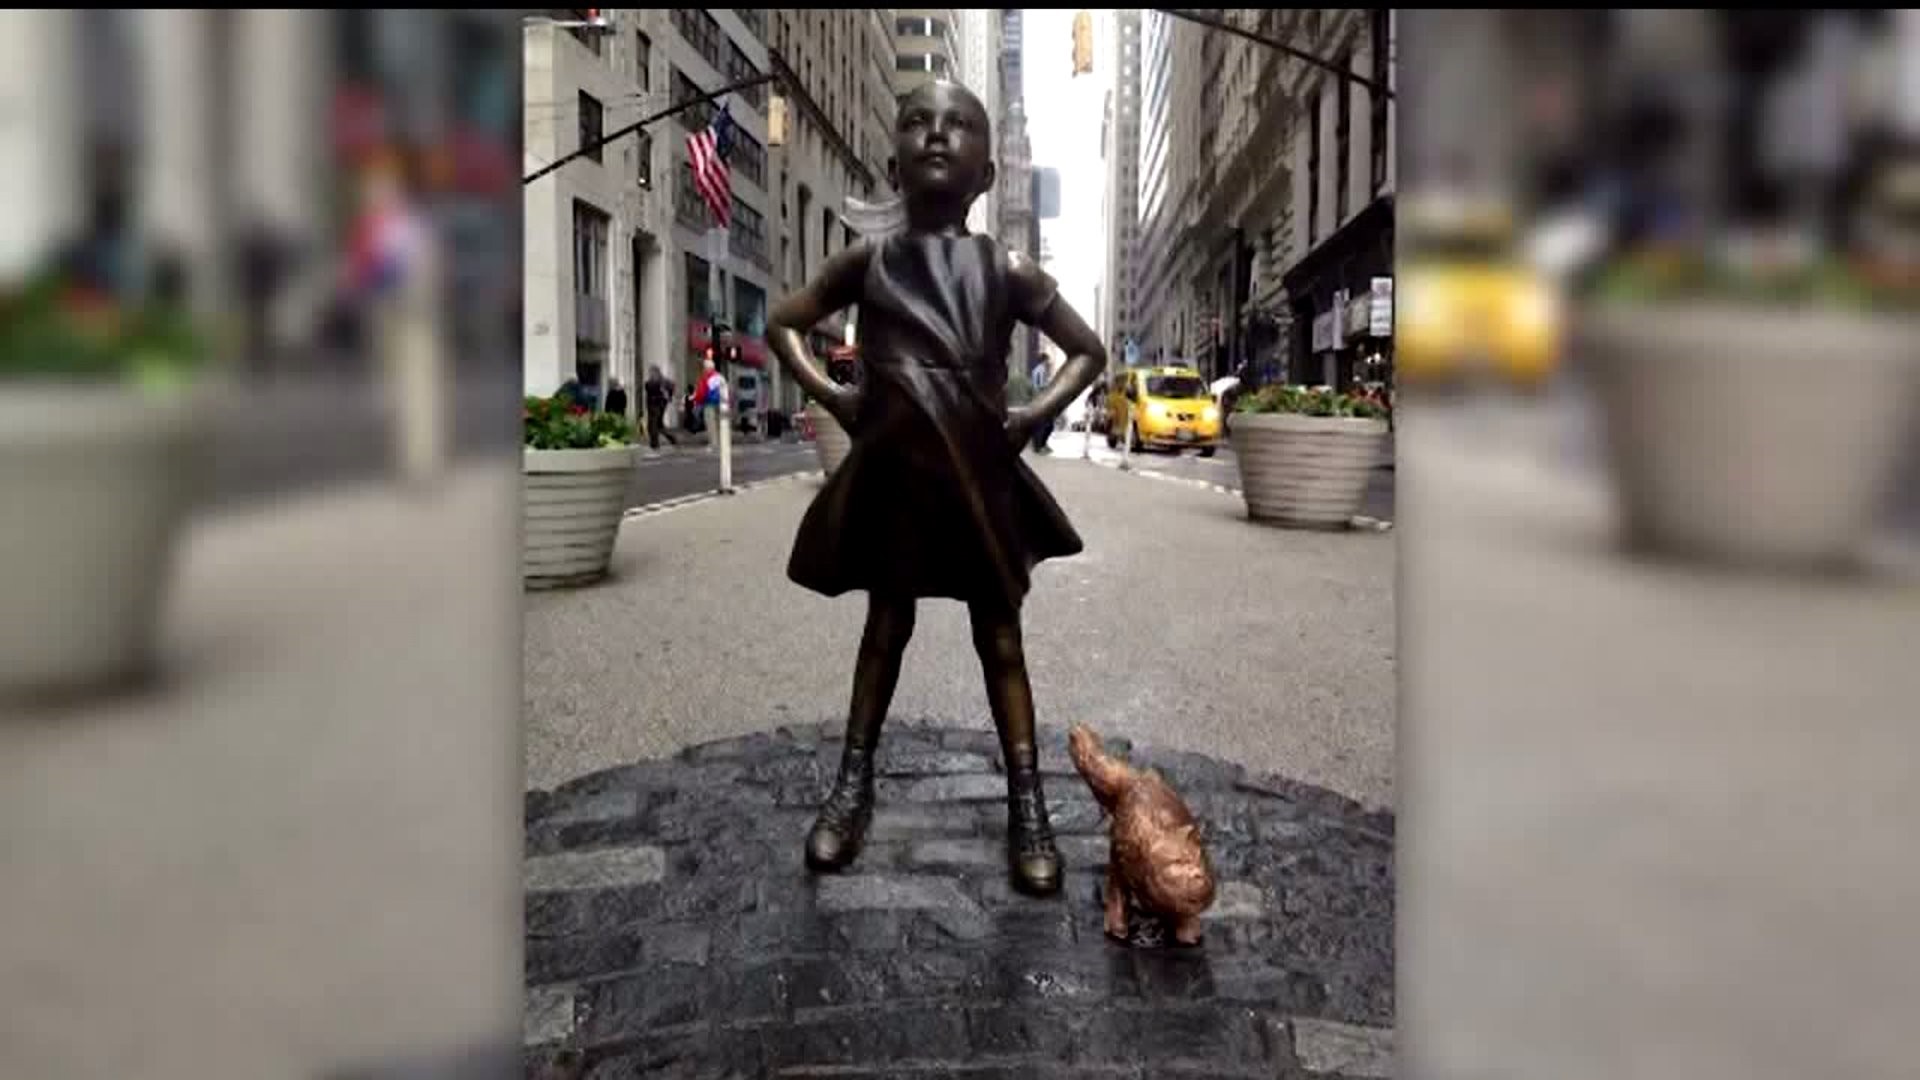 Artist "adds" to Fearless Girl statue on Wall Street